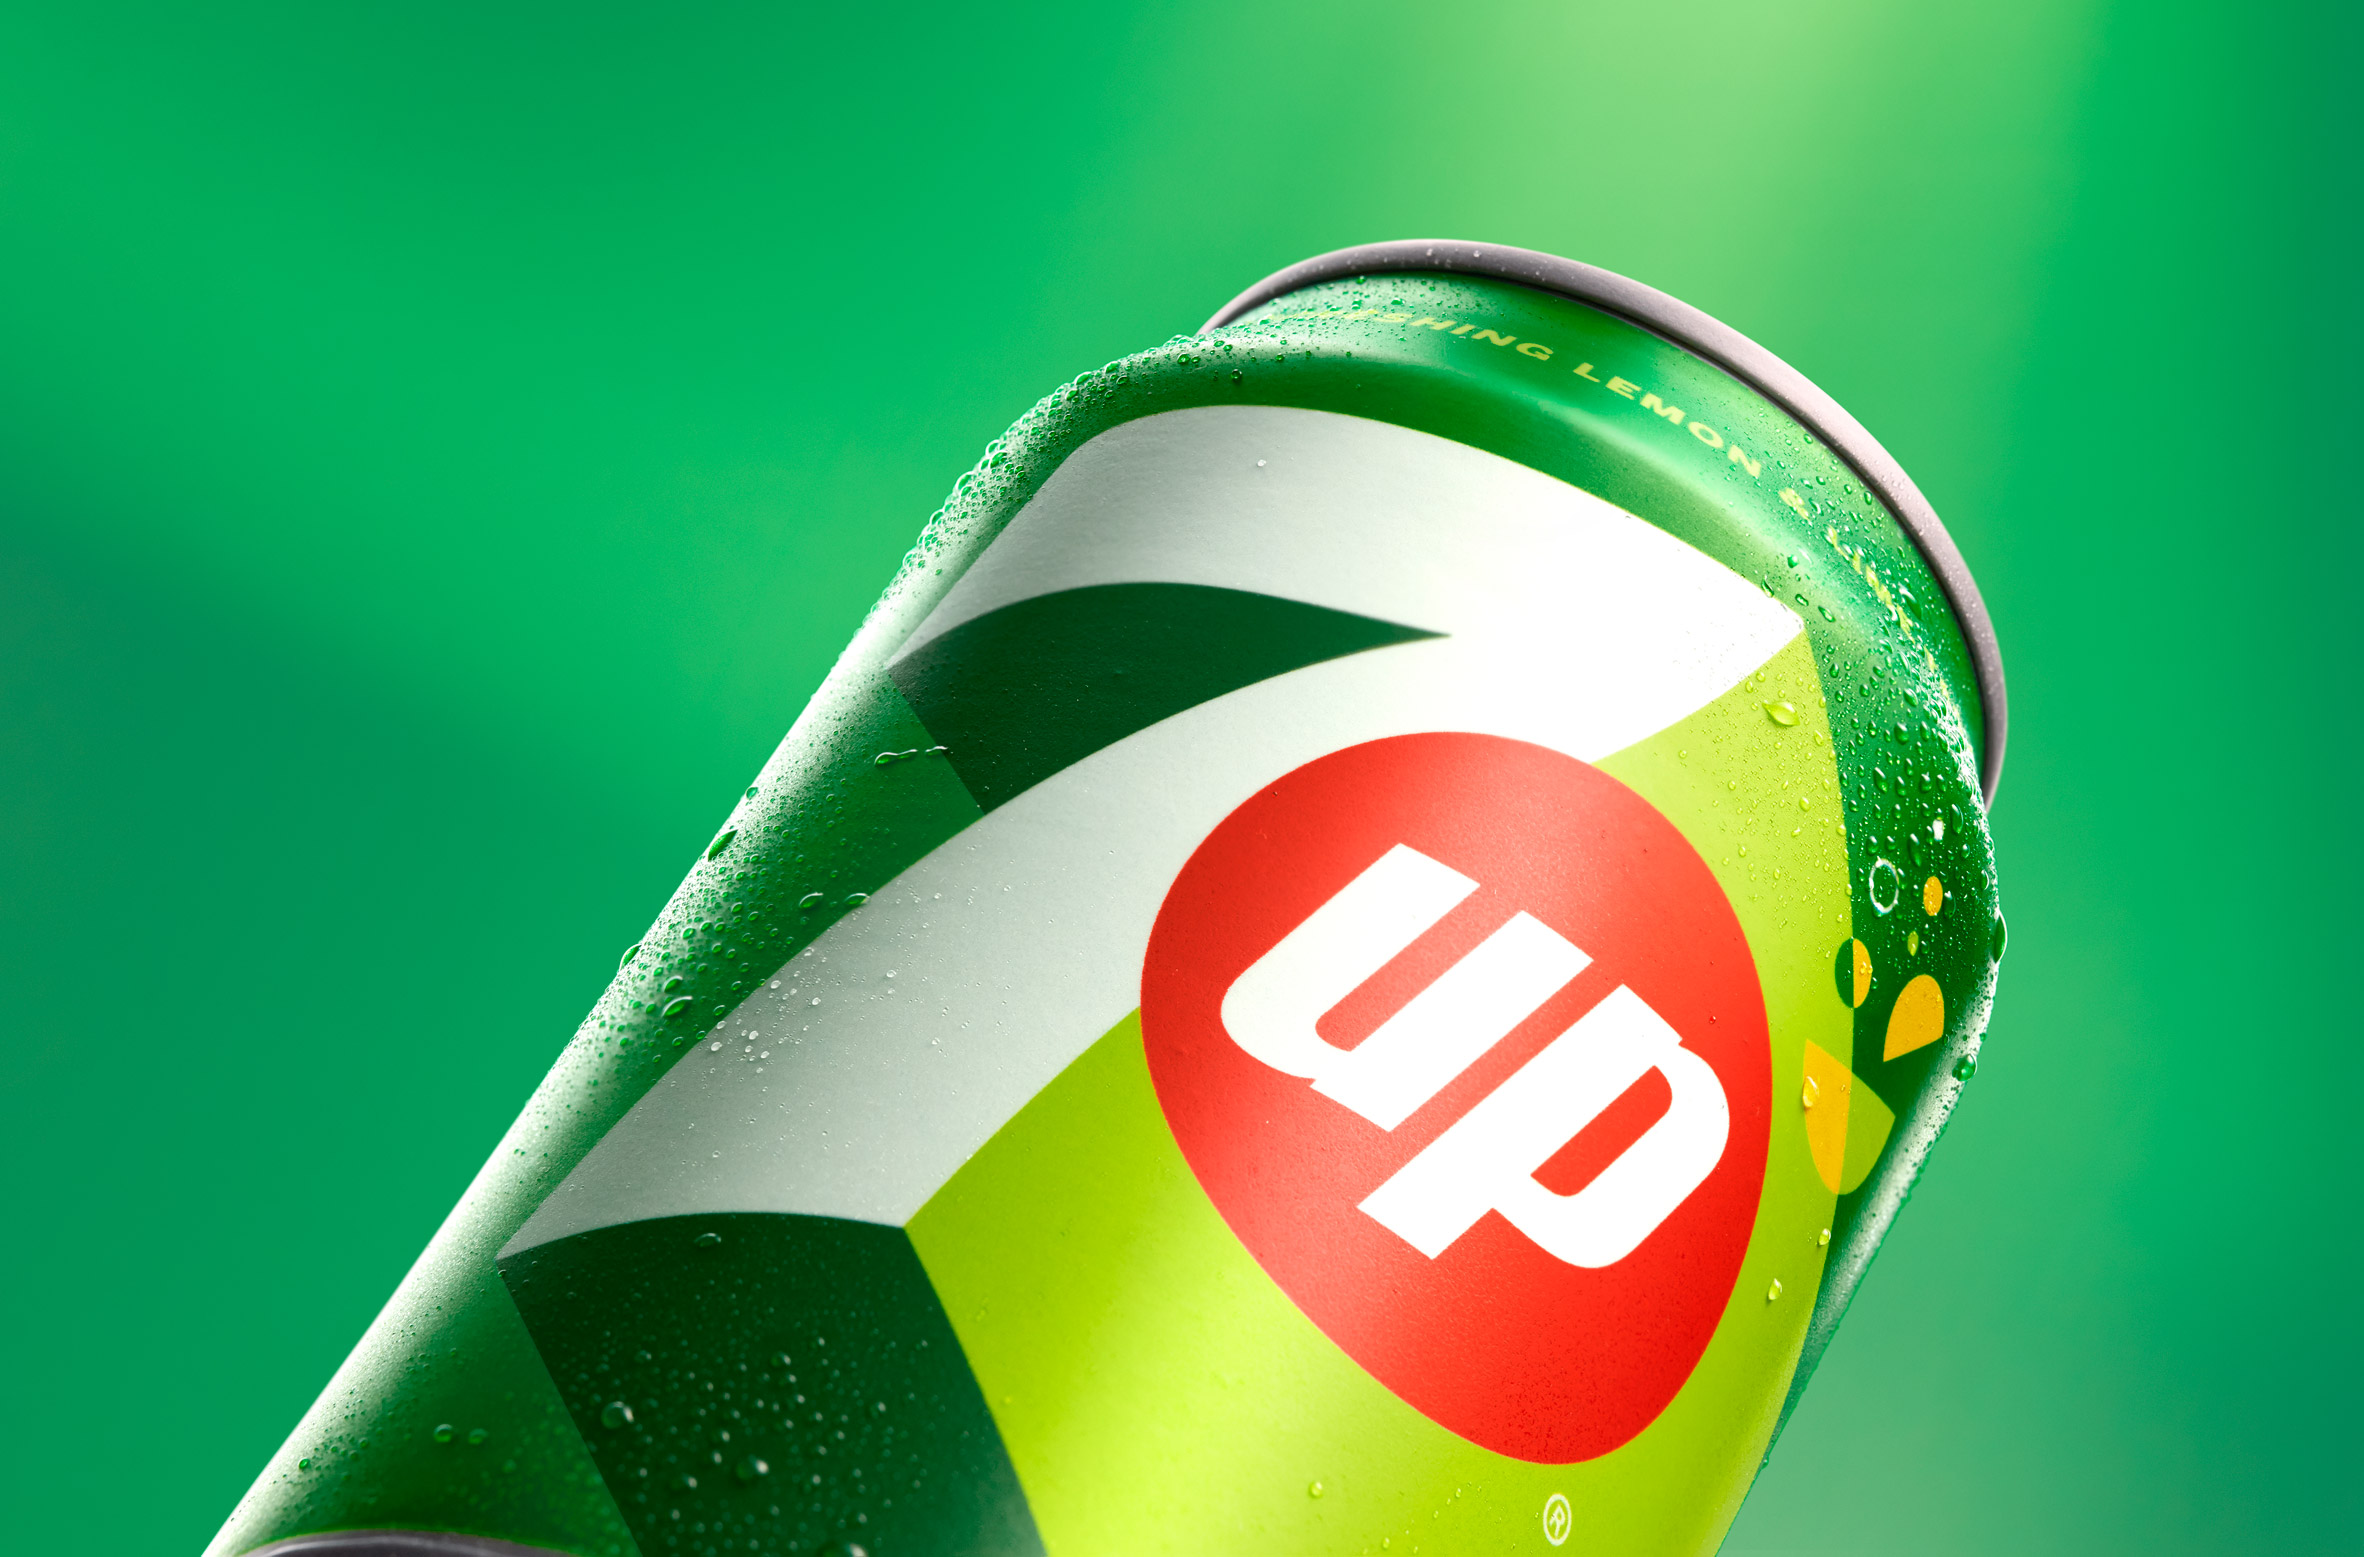 7UP rebrands with fresh look that is all about being uplifting